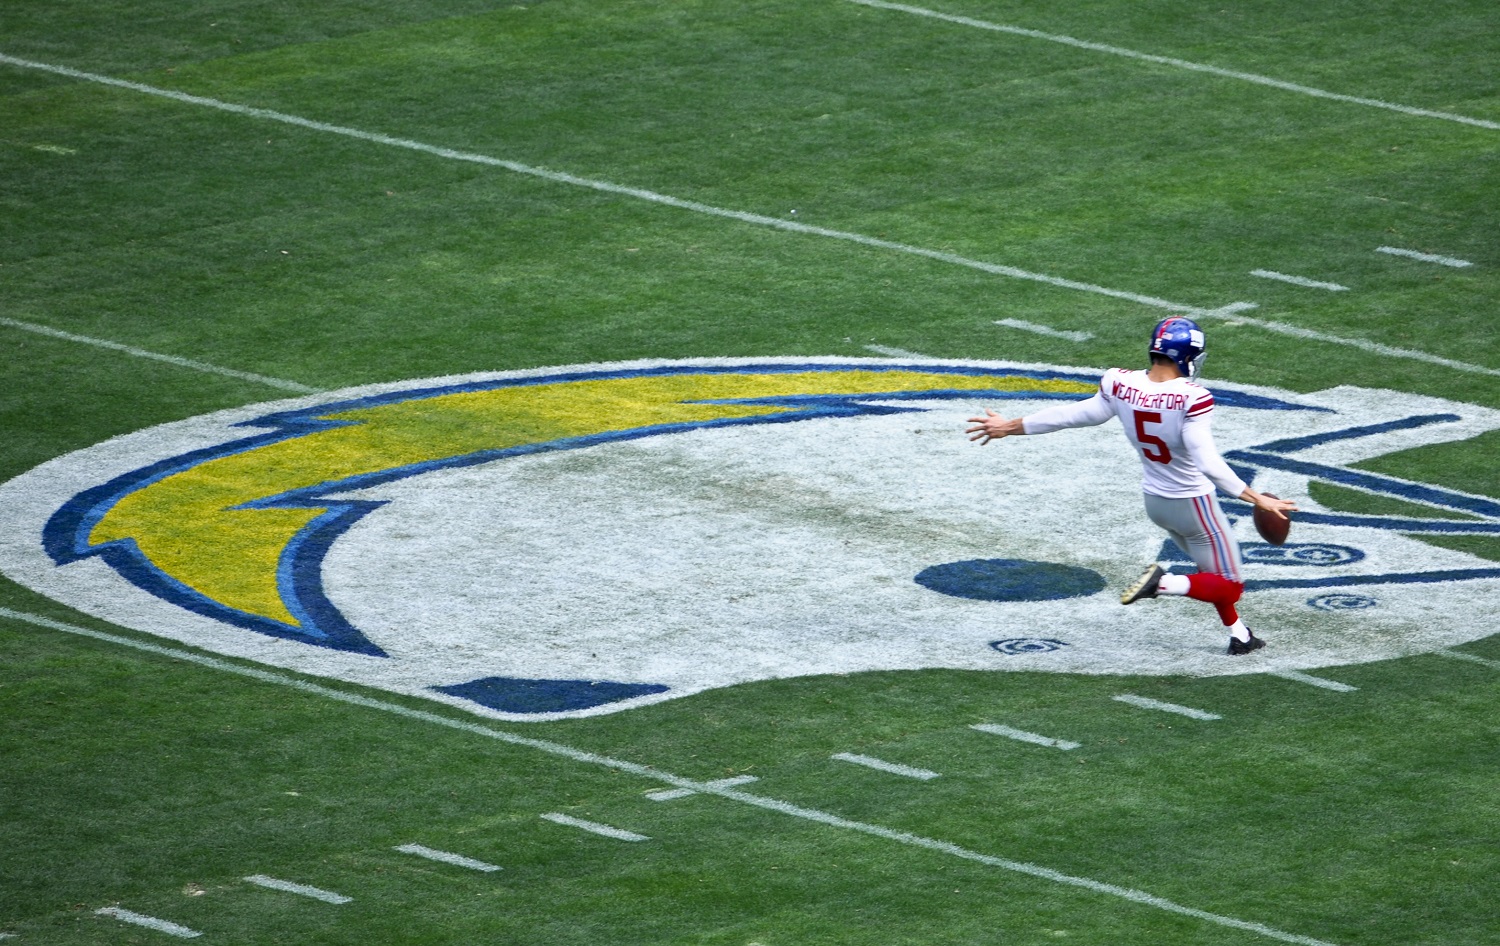 New York Giants punter Steve Weatherford warms up on the San Diego Chargers logo during pre-game activities before the NFL football game between the Chargers and  Giants  Sunday, Dec. 8, 2013, in San Diego. (AP Photo/Denis Poroy)